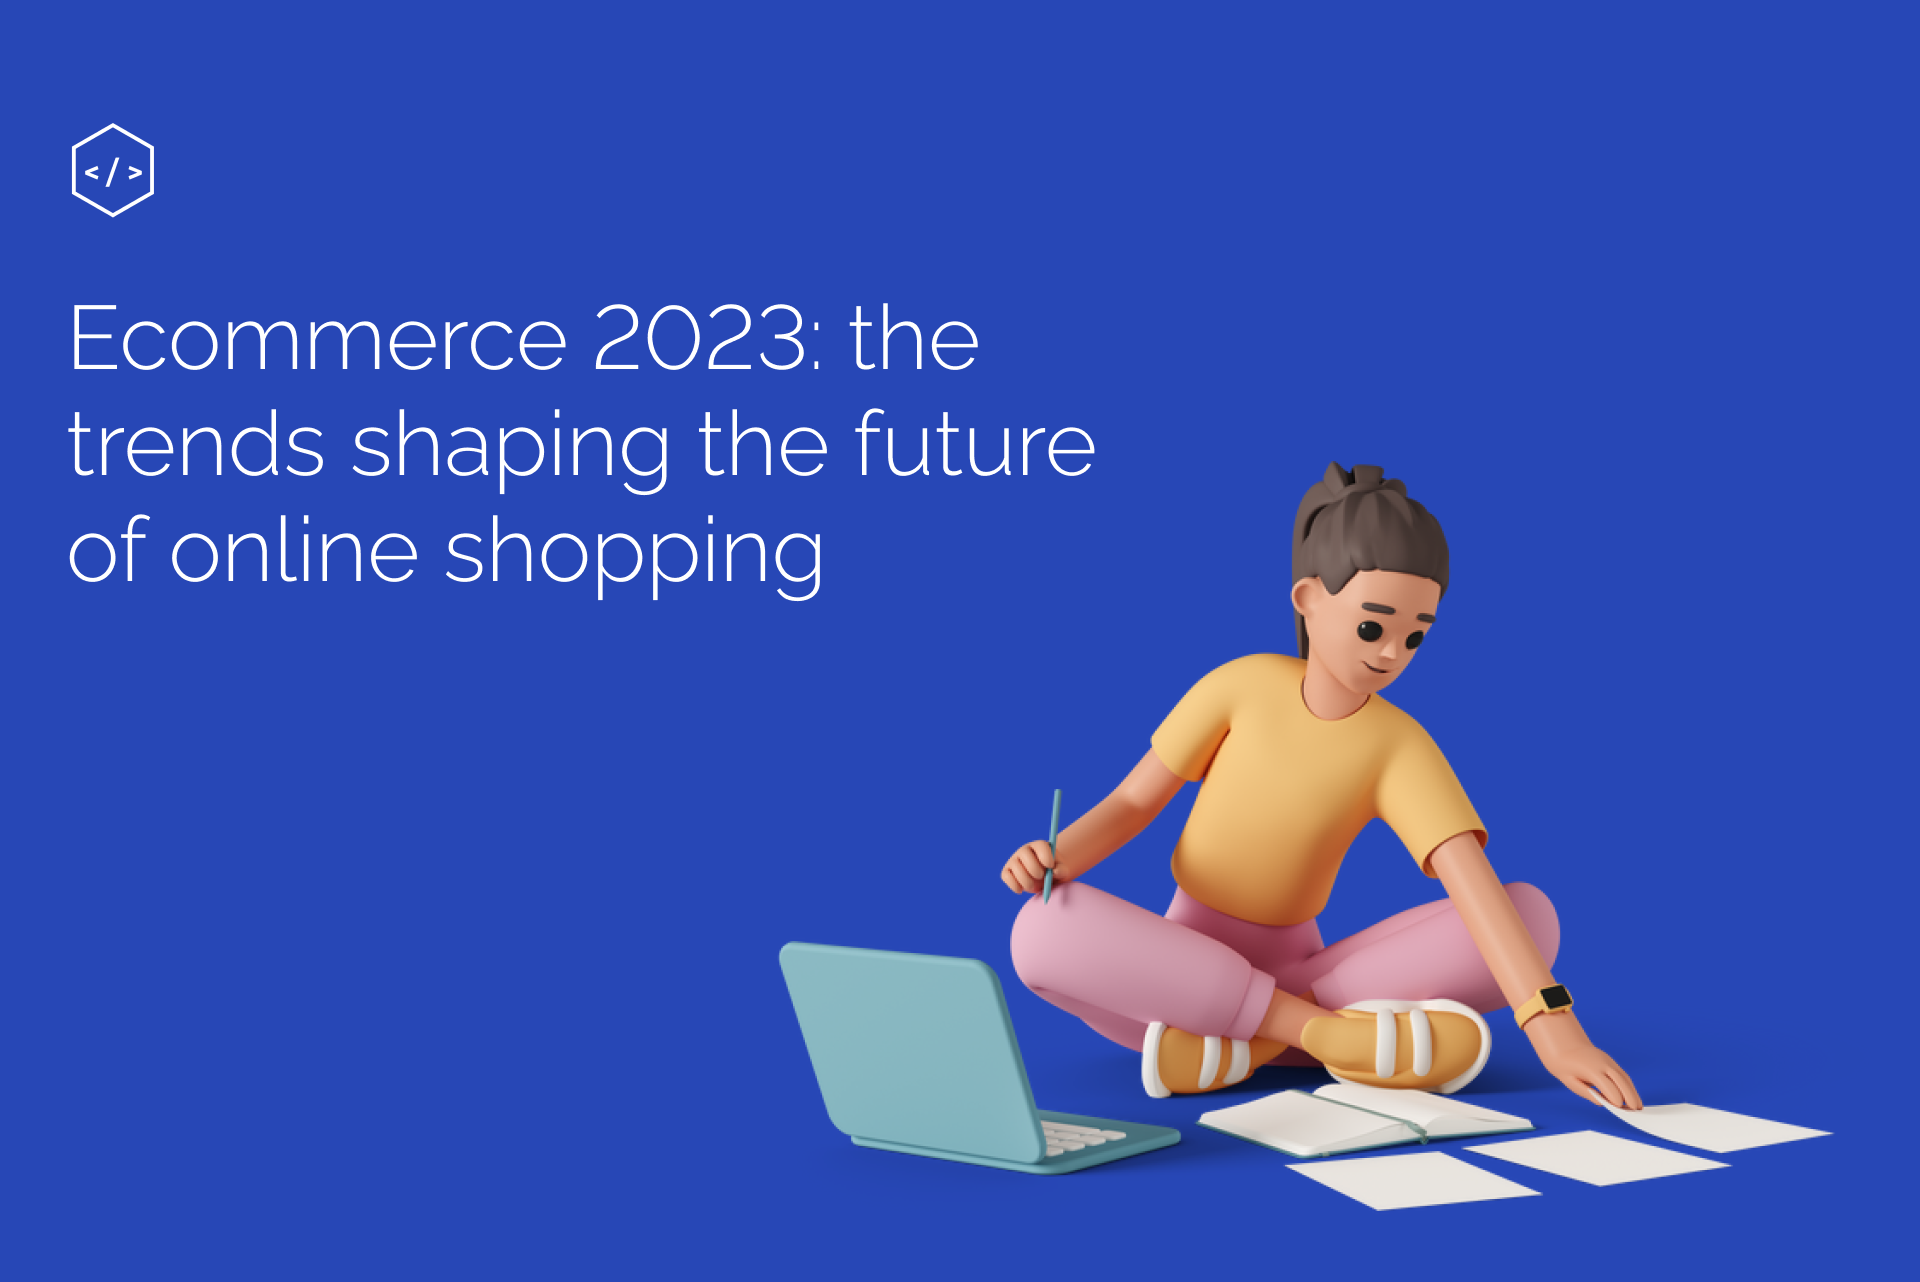 How eCommerce will change in the end of 2023